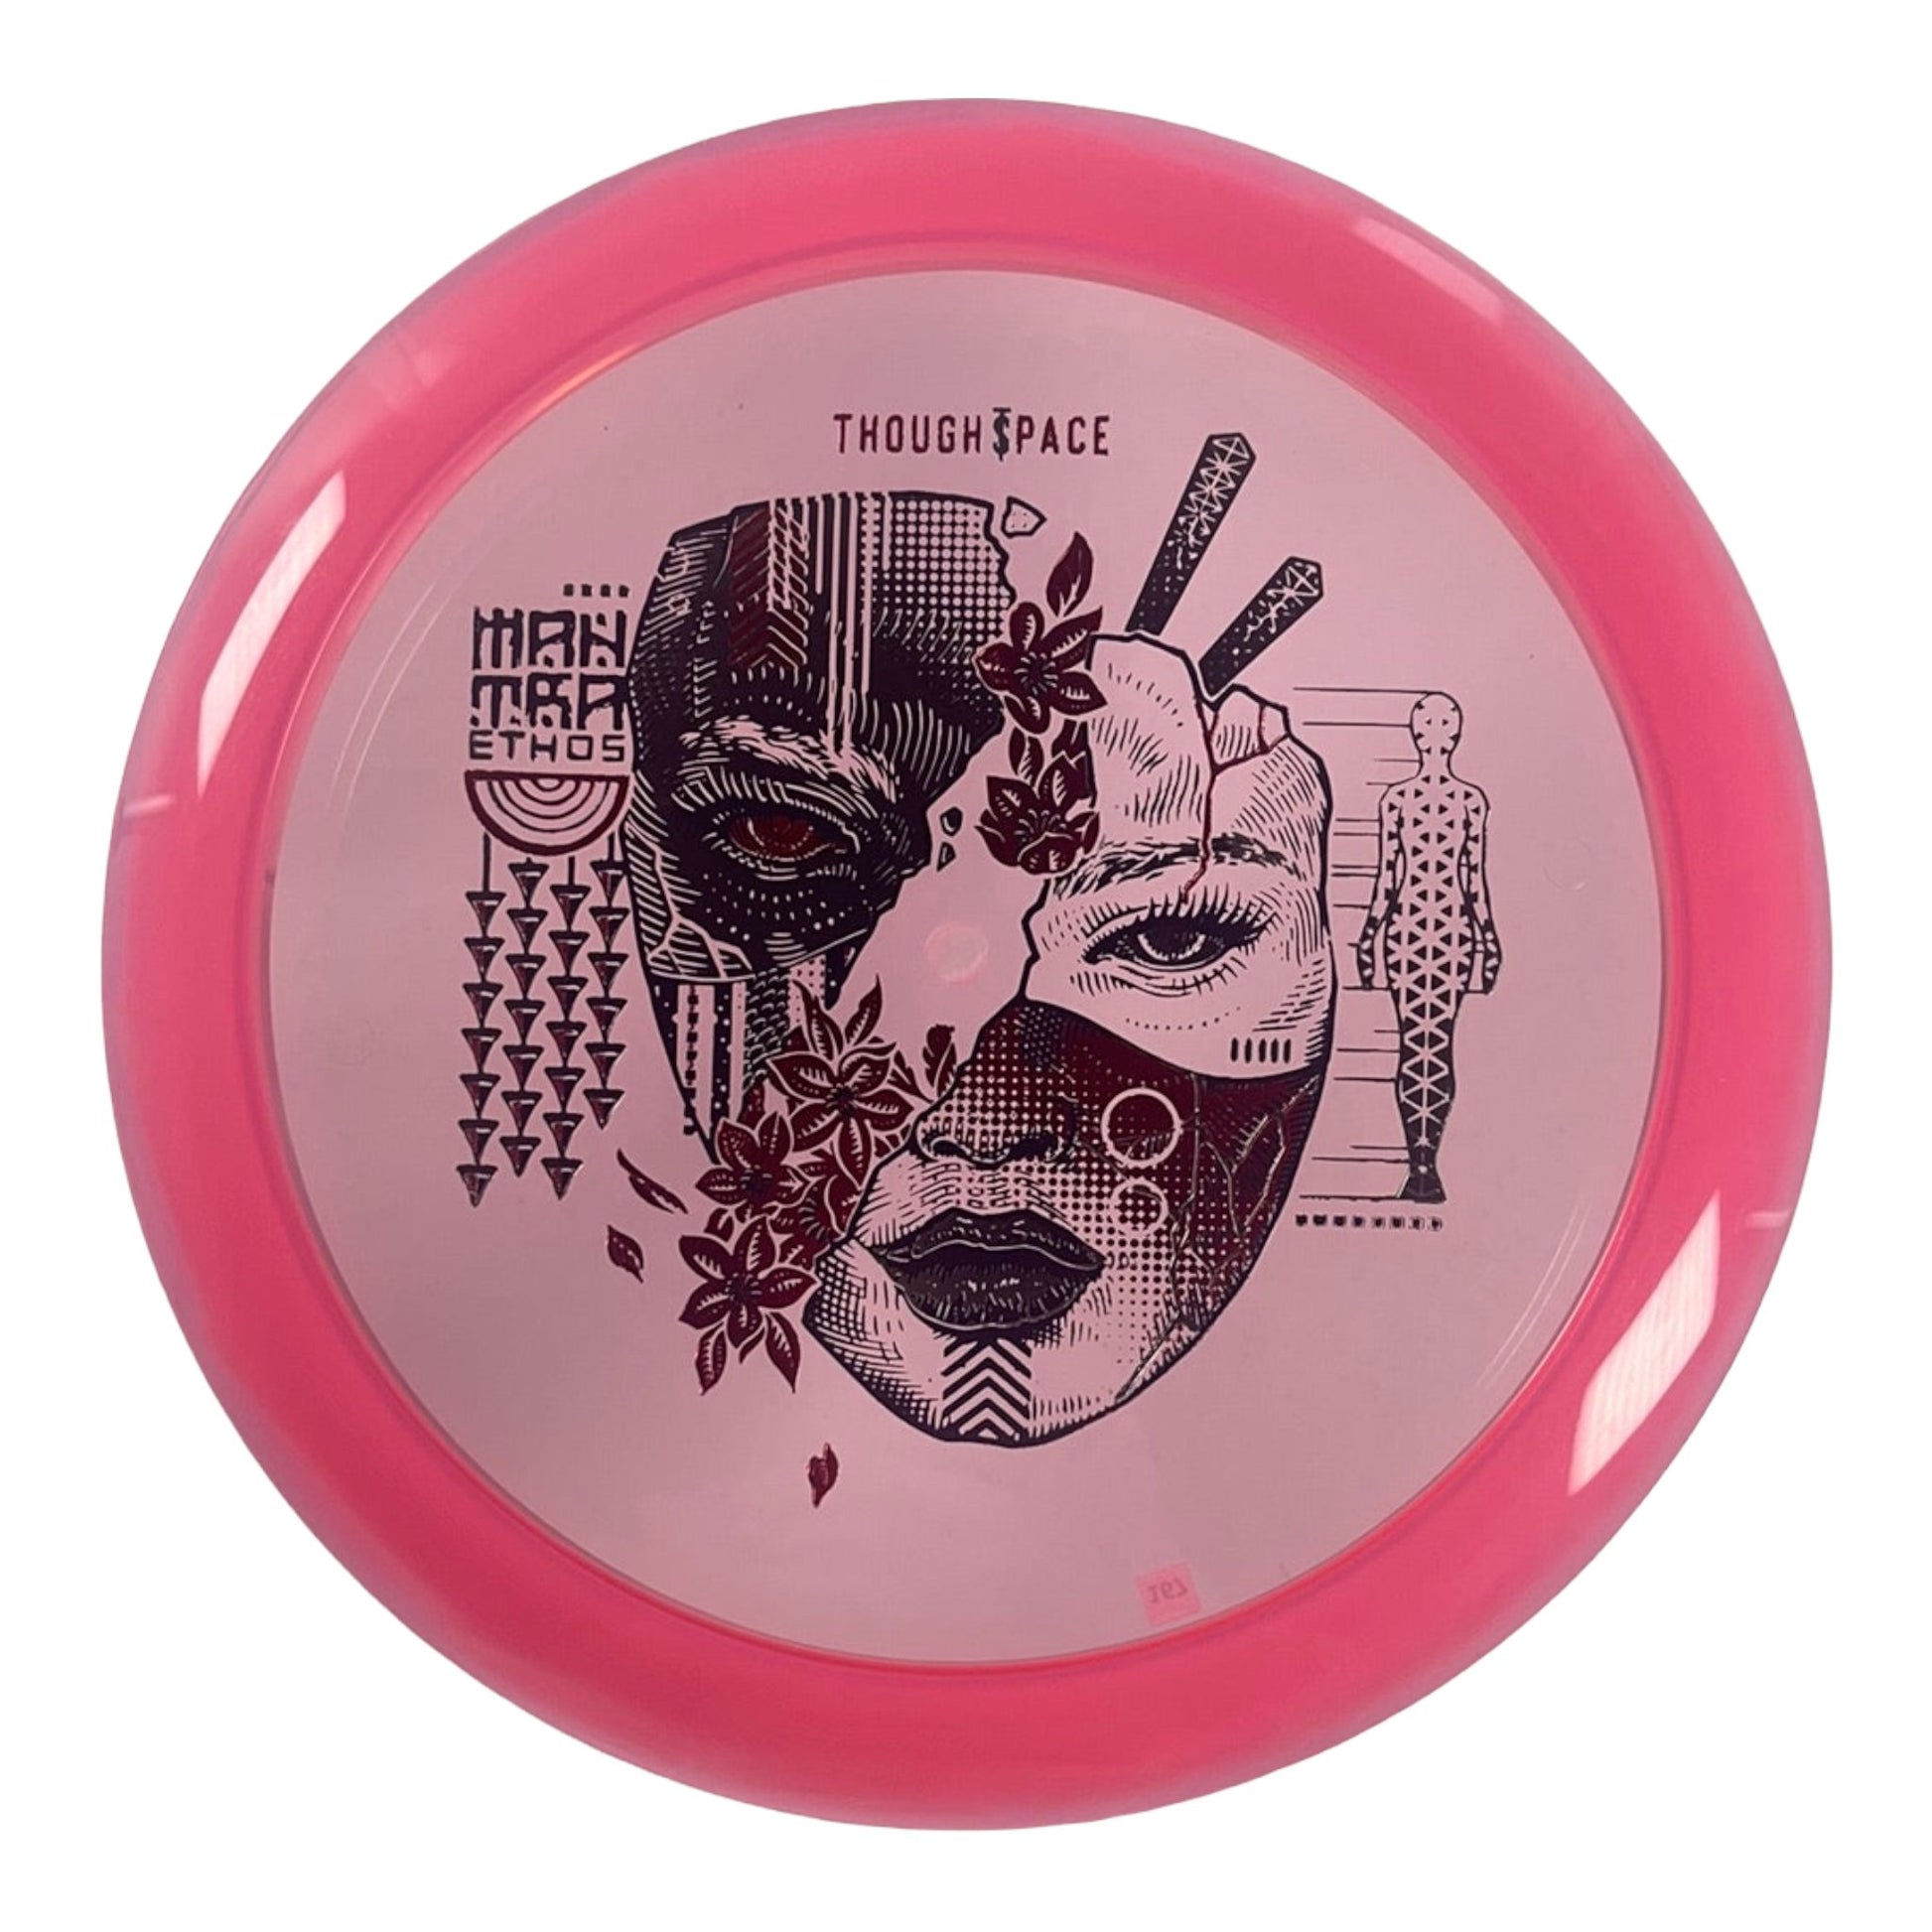 Thought Space Athletics Mantra | Ethos | Pink/Red 167g Disc Golf